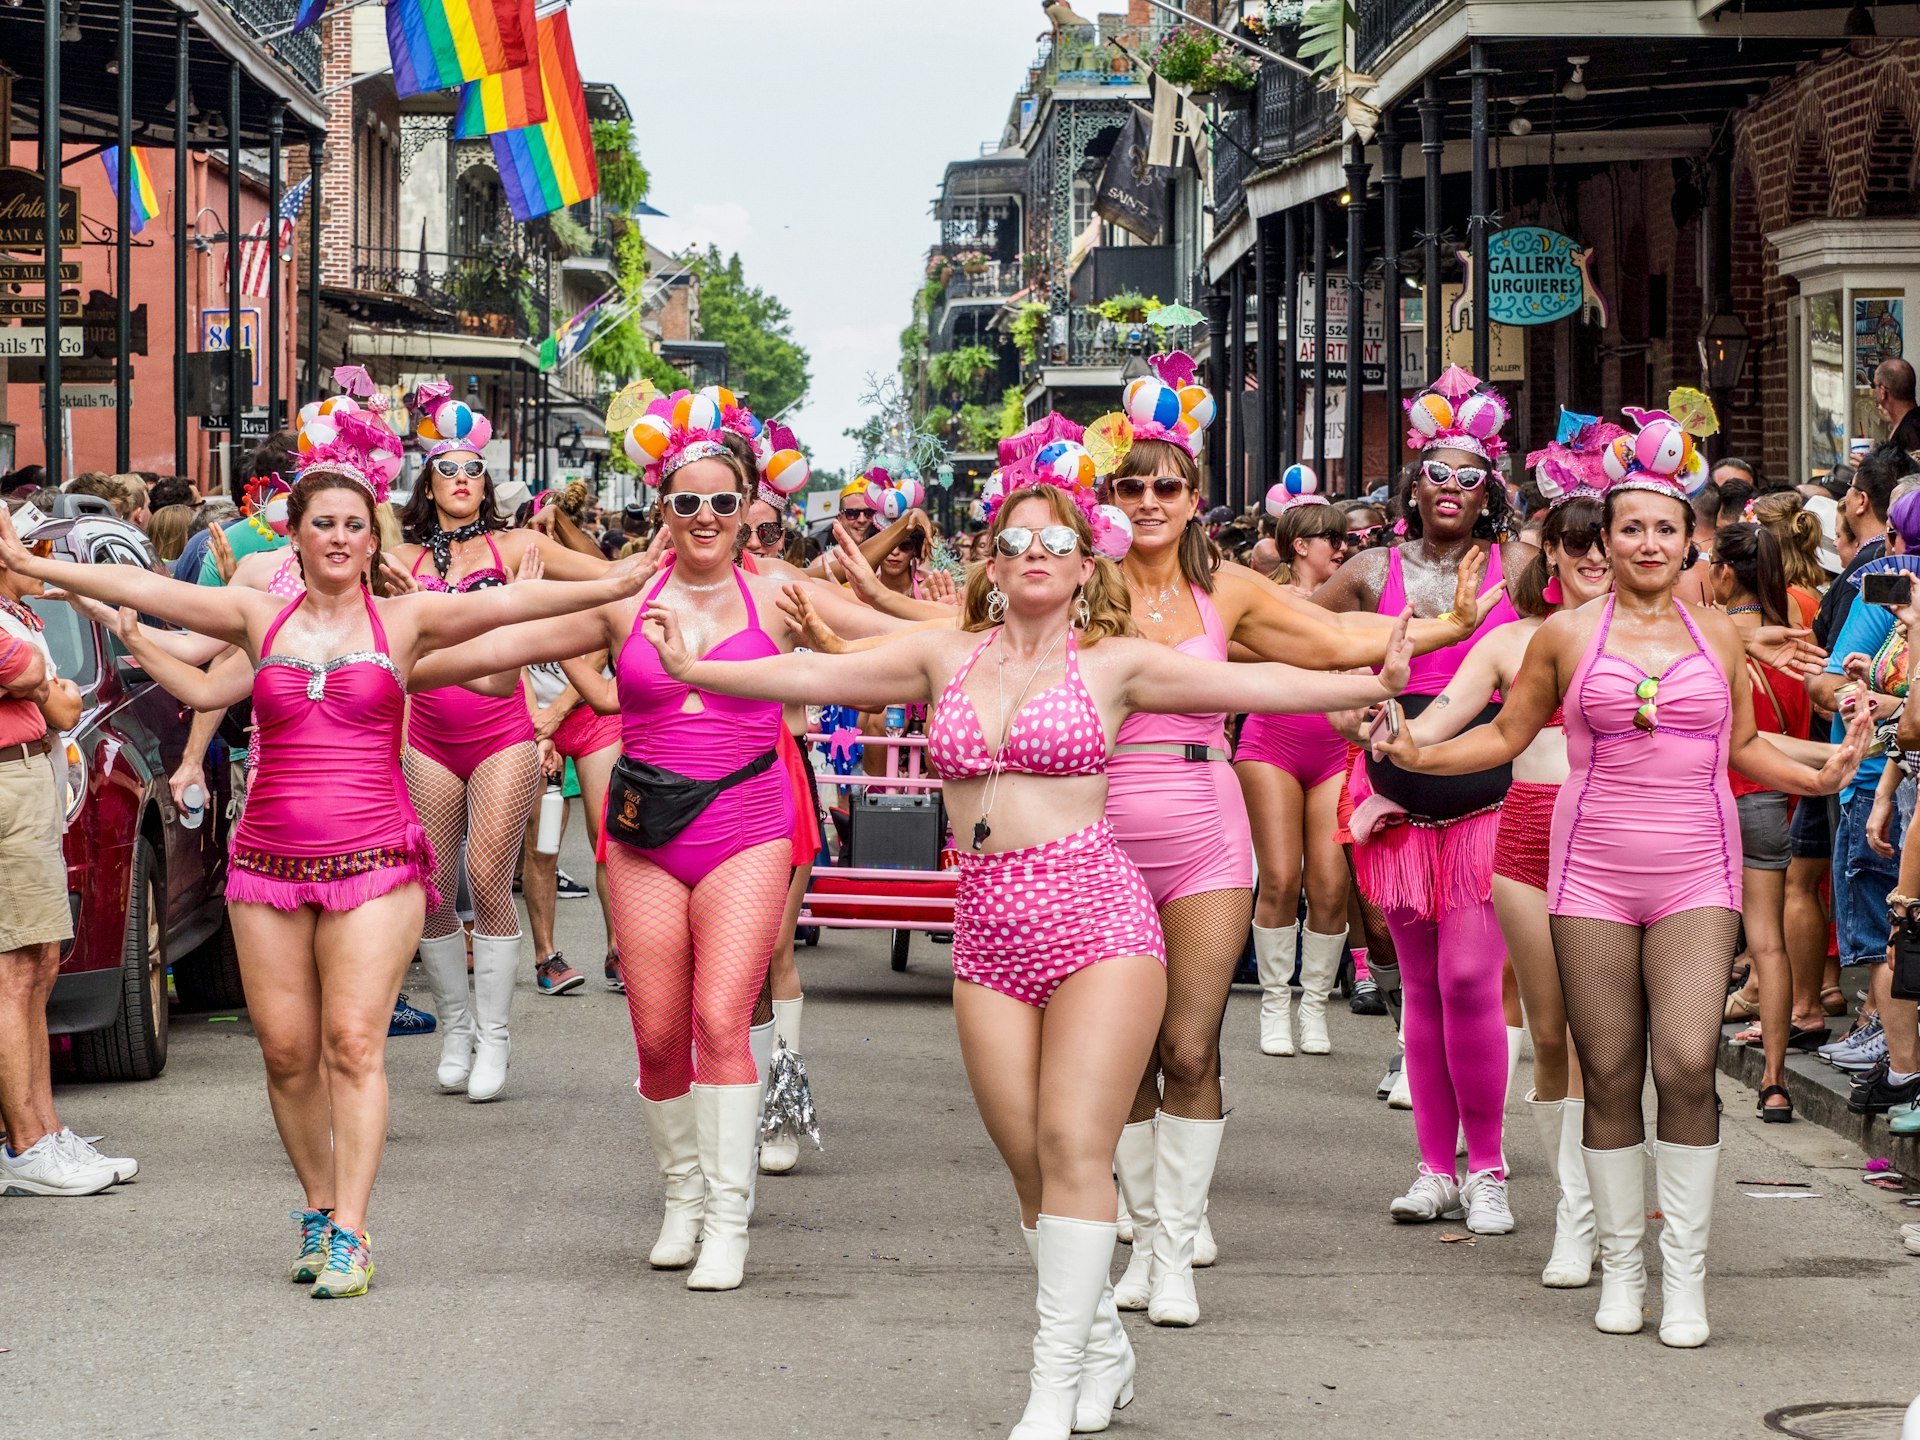 Female revelers march through the French Quarter during the Pride parade, New Orleans, Louisiana, USA